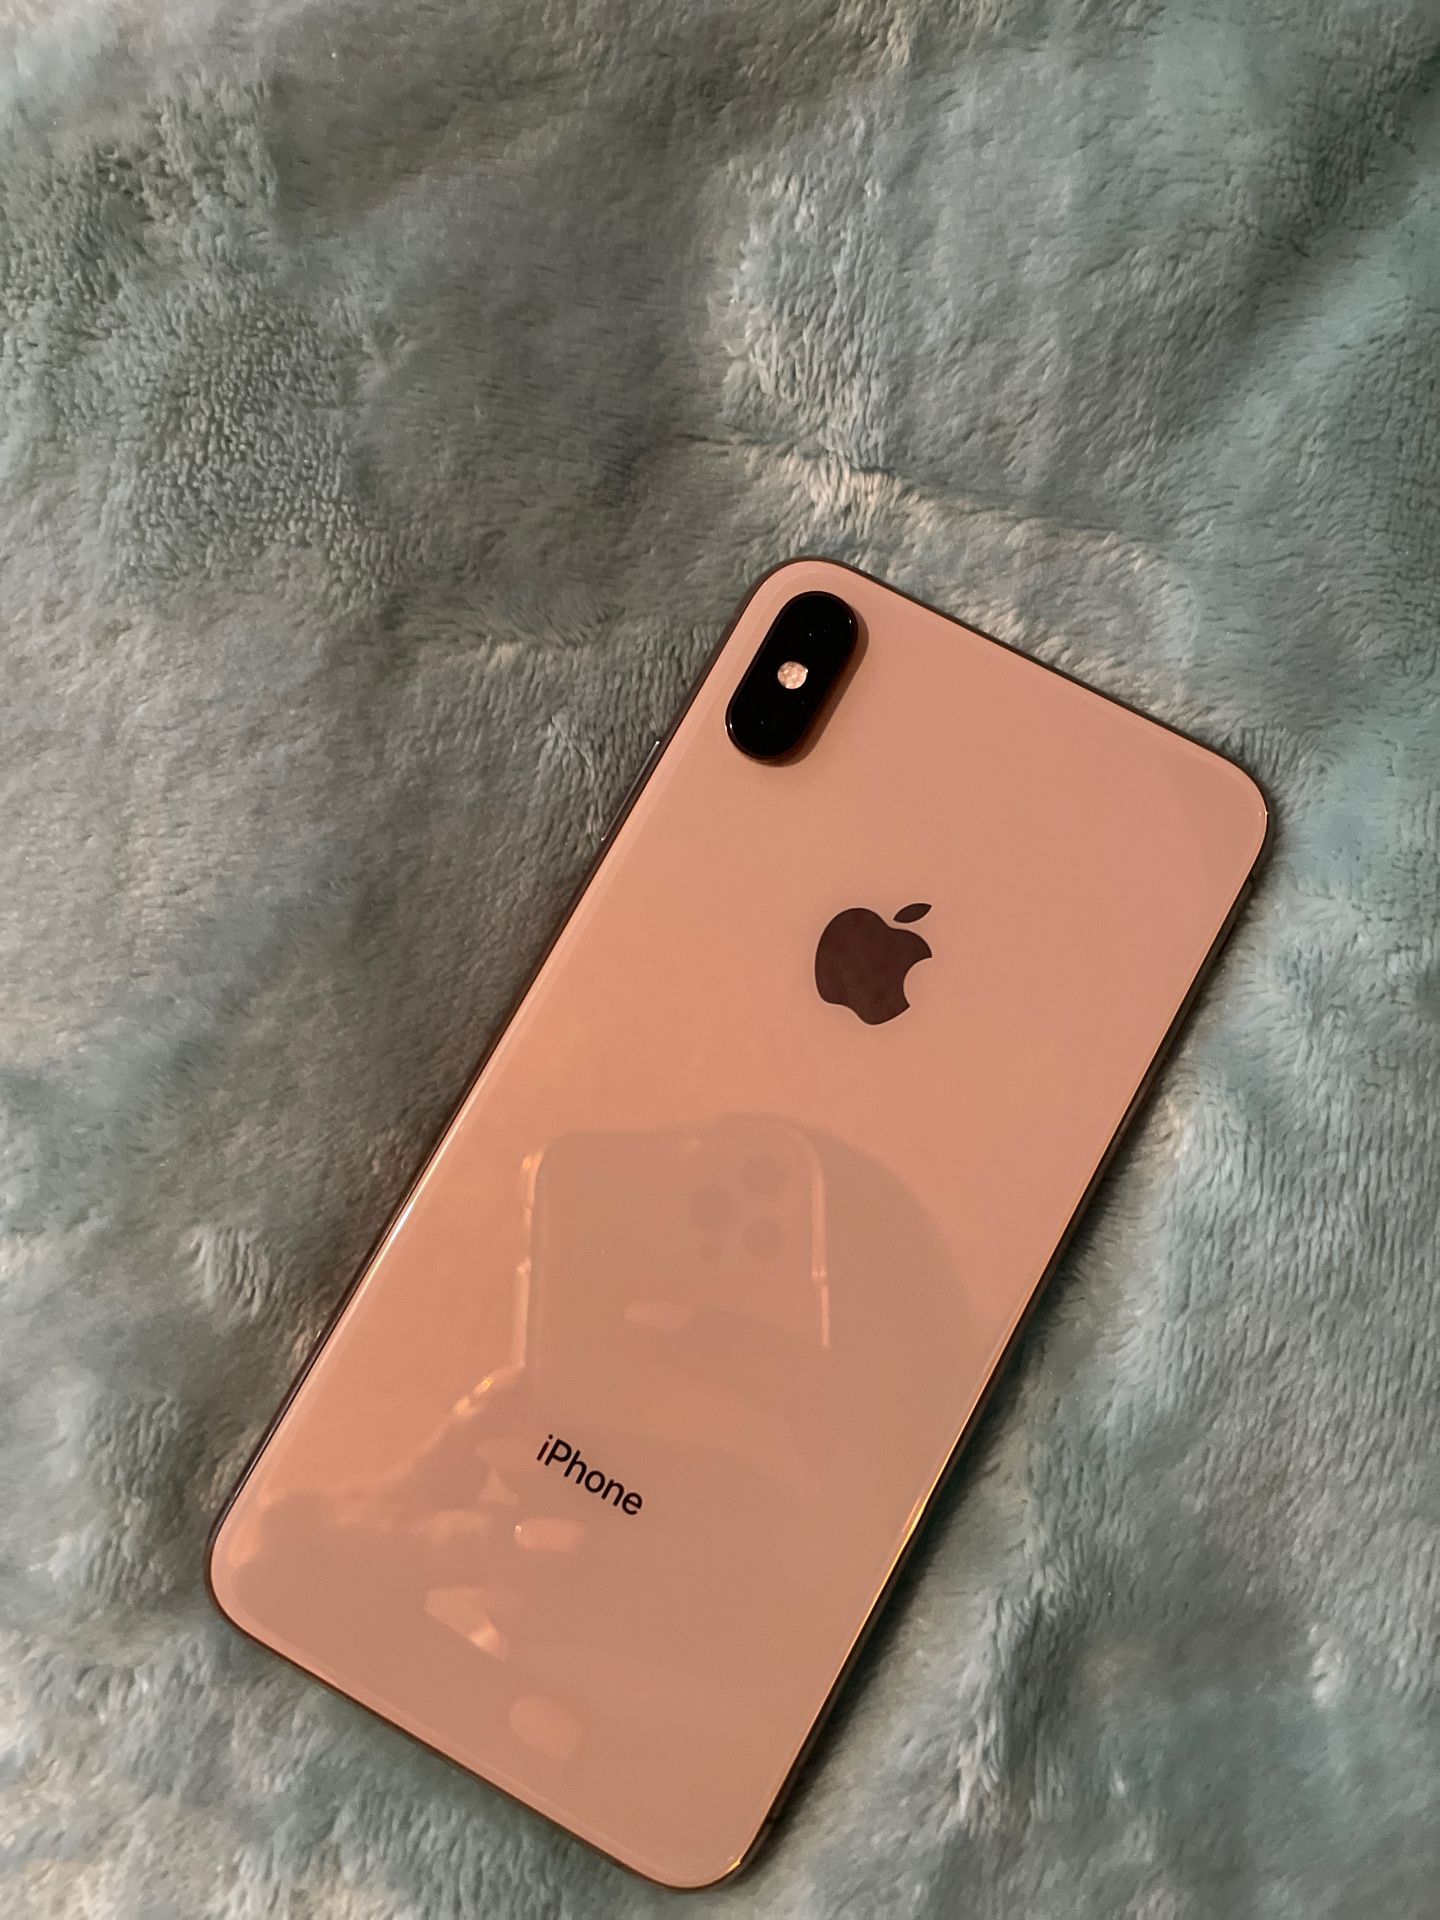 iPhone XS Max- Unlocked purchased with AT&T